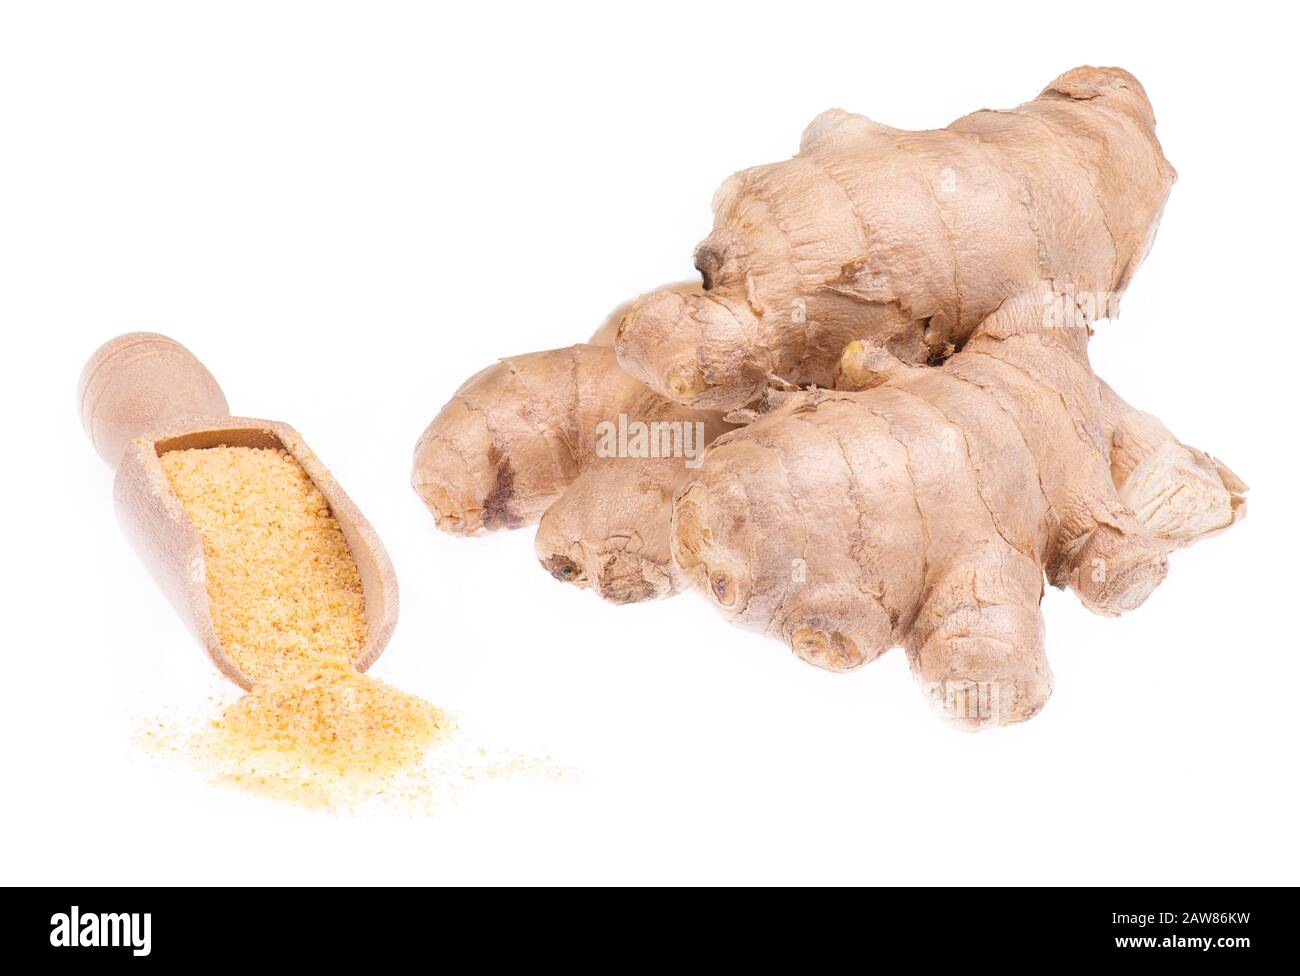 Gresh ginger roots and poweder isolated on a white background Stock Photo